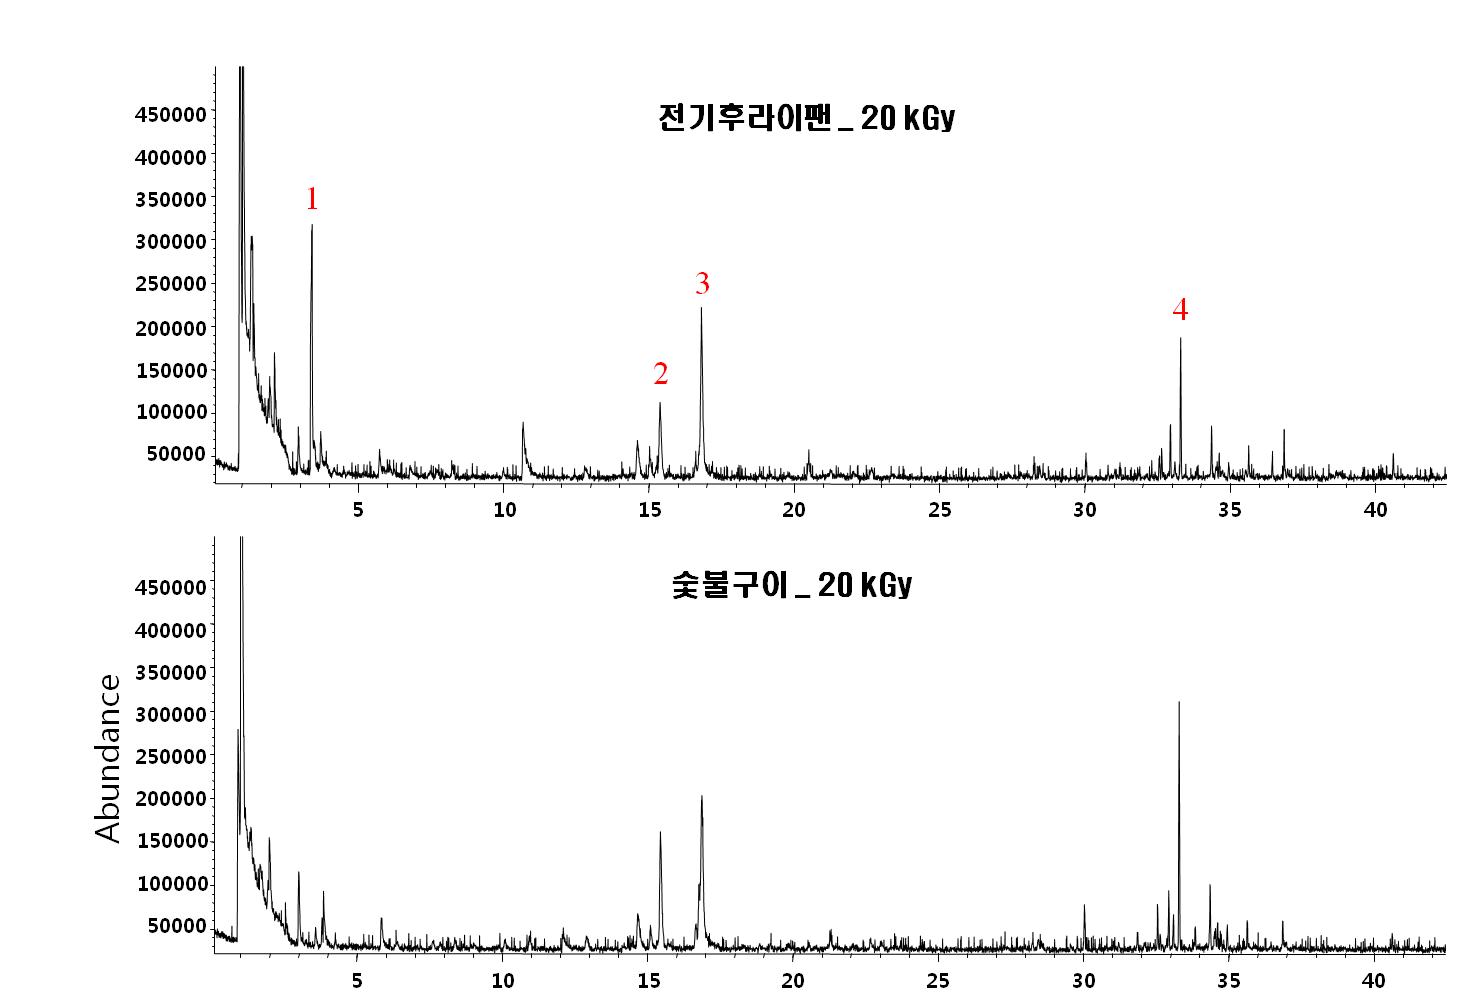 Comparison of chromatogram of irradiated dakgalbi using charcoal and electronic pan.